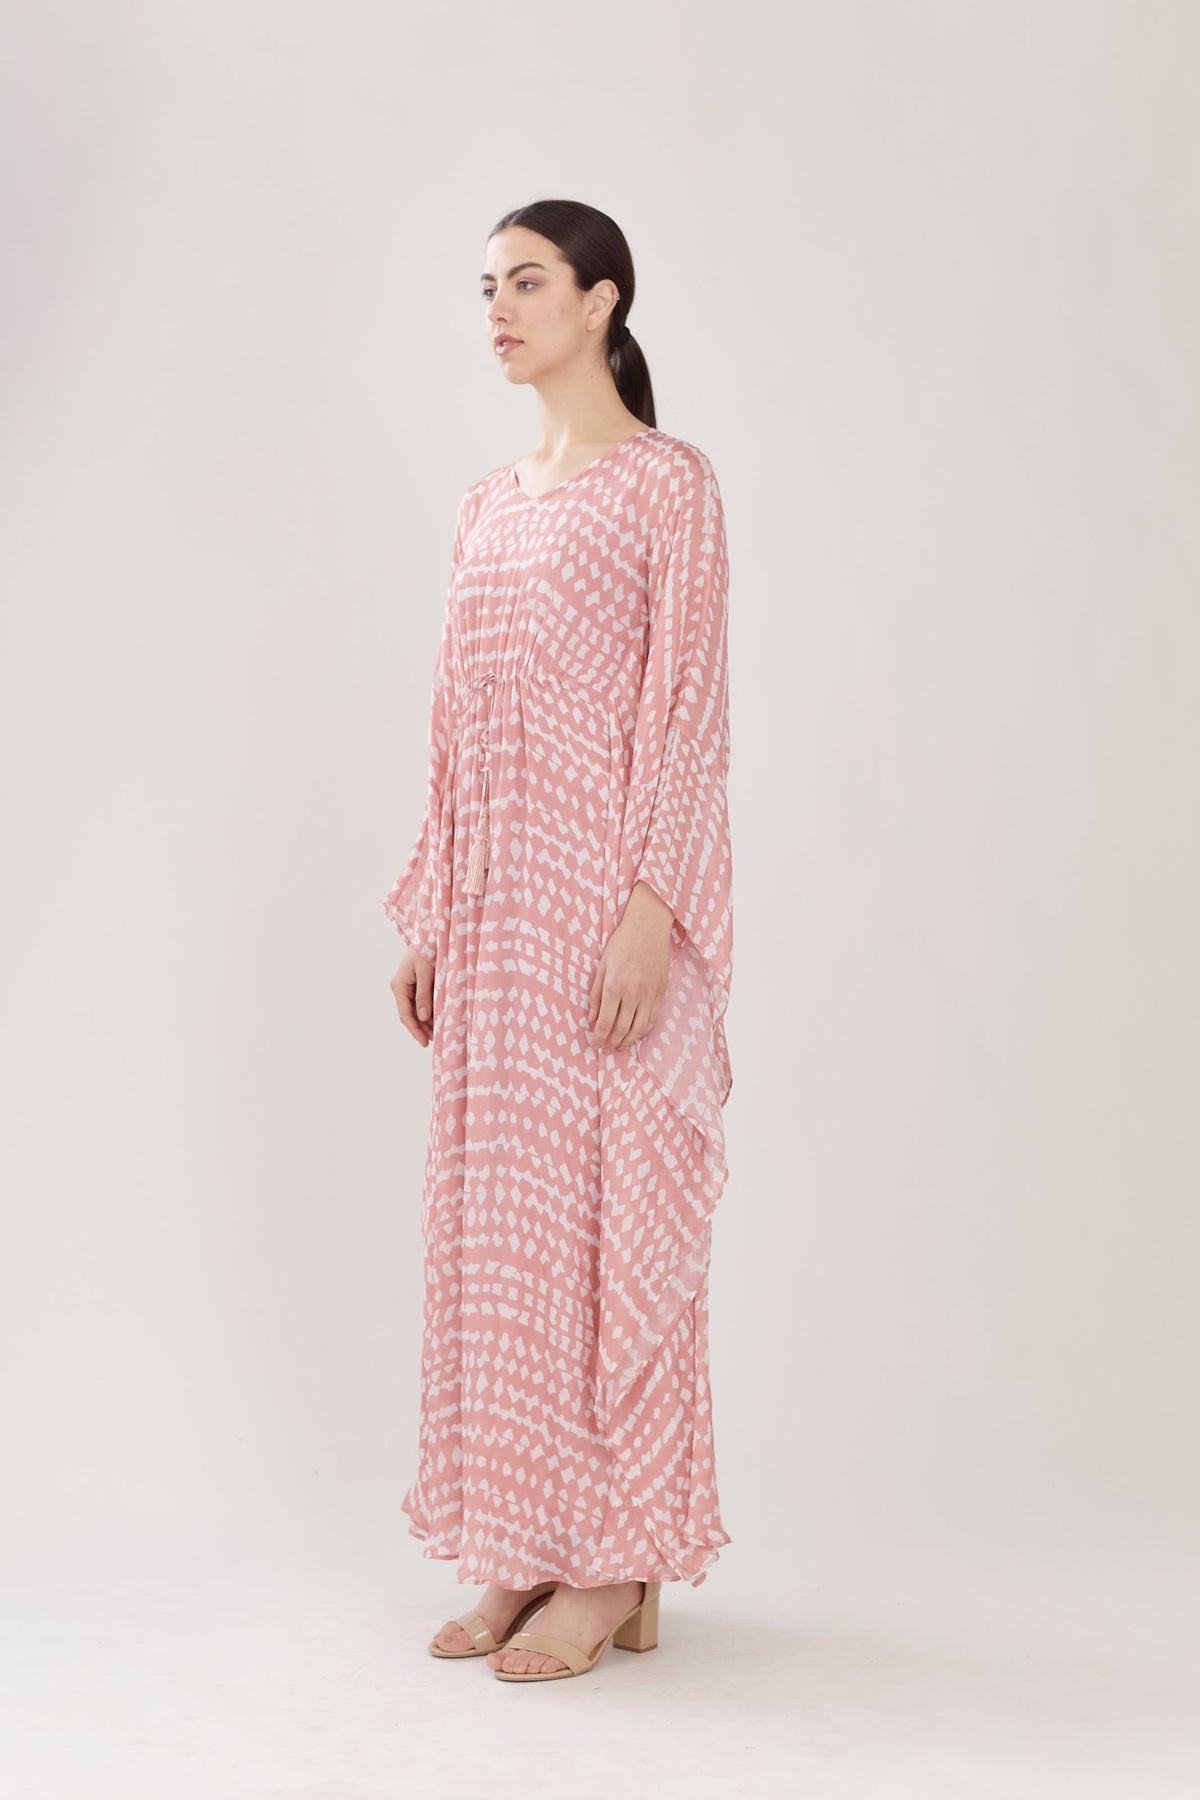 PINK AND WHITE ABSTRACT KAFTAN